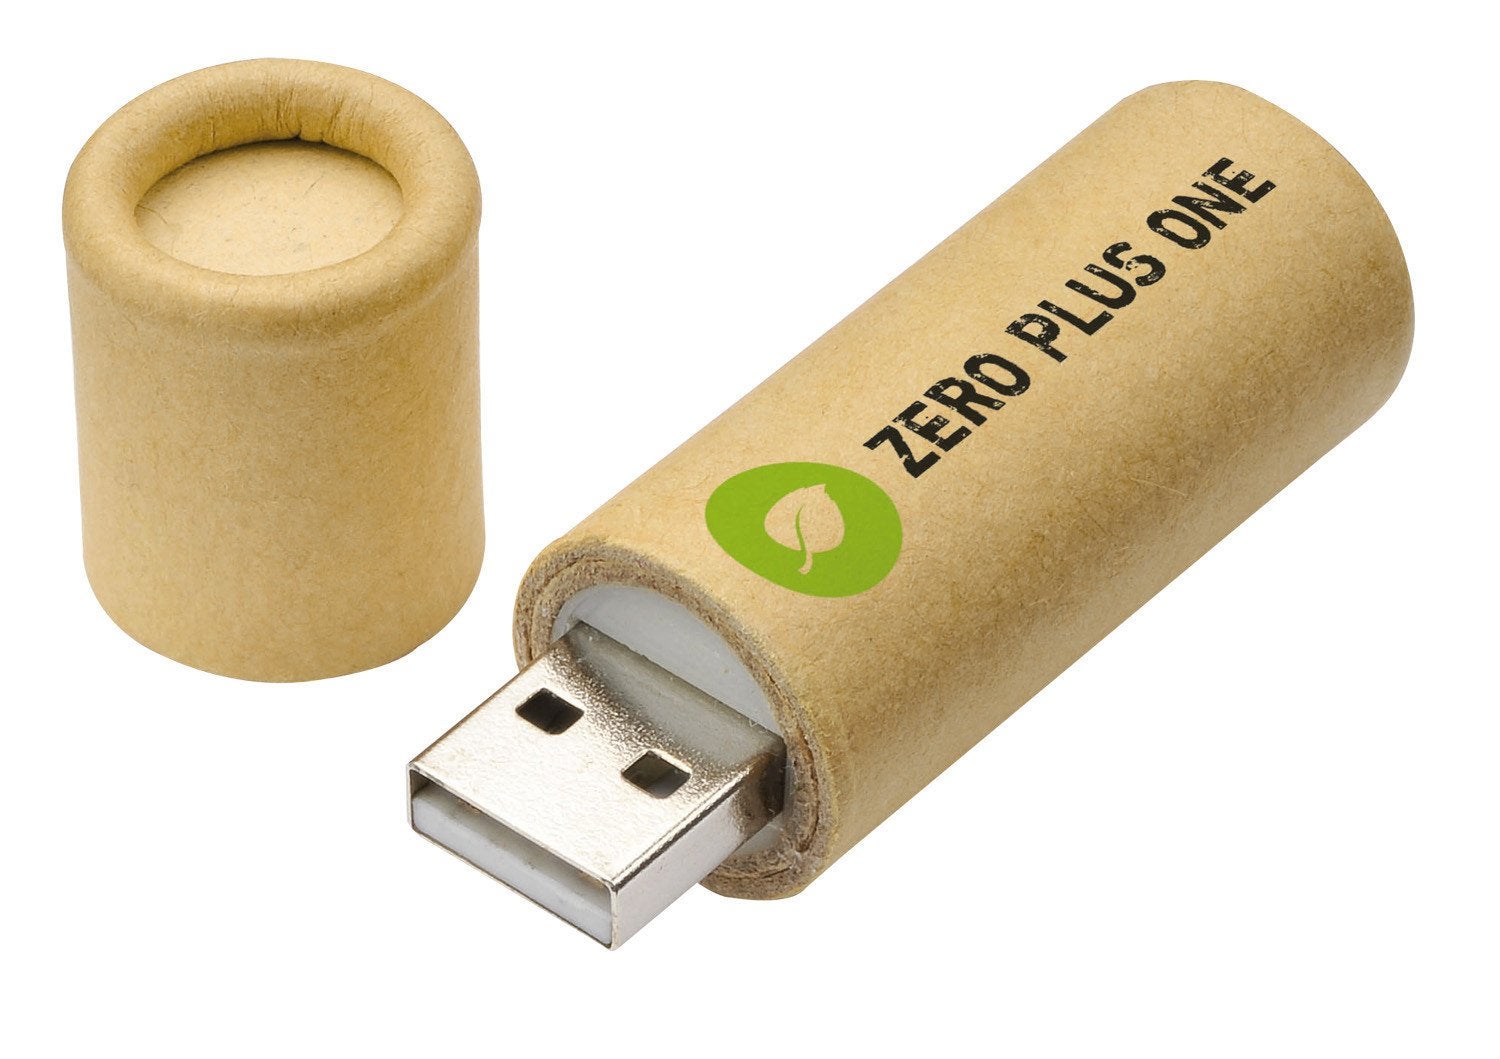 Recycled USB